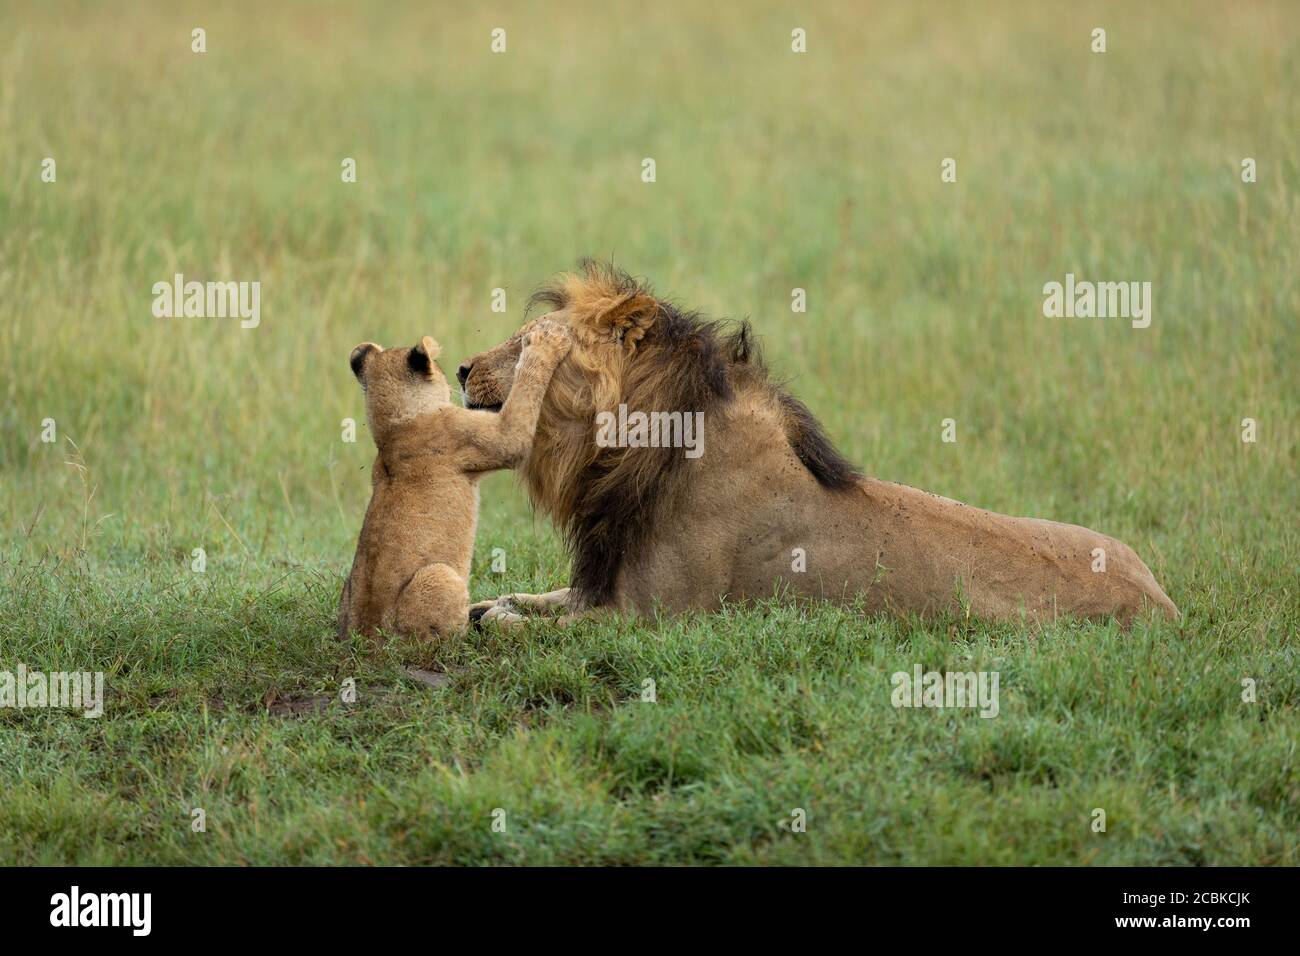 Baby lion disturbing father male lion lying in green grass in Serengeti National Park in Tanzania Stock Photo